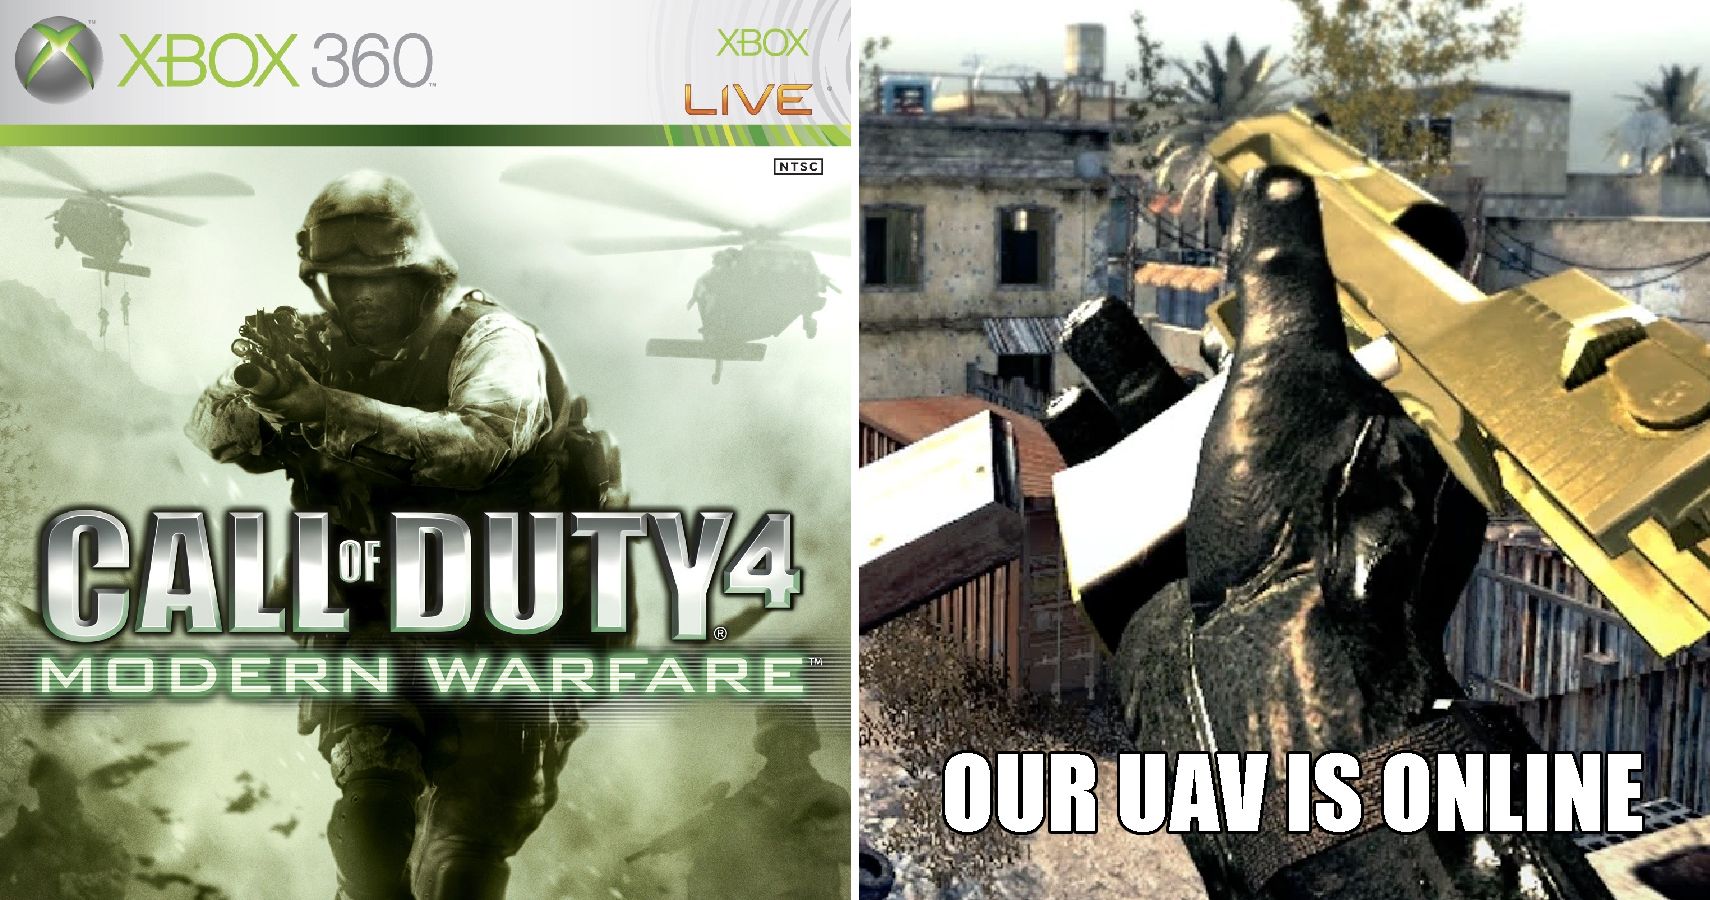 Why is Call of Duty Modern Warfare (recent one, not COD 4) the worst COD  game to some people? - Quora